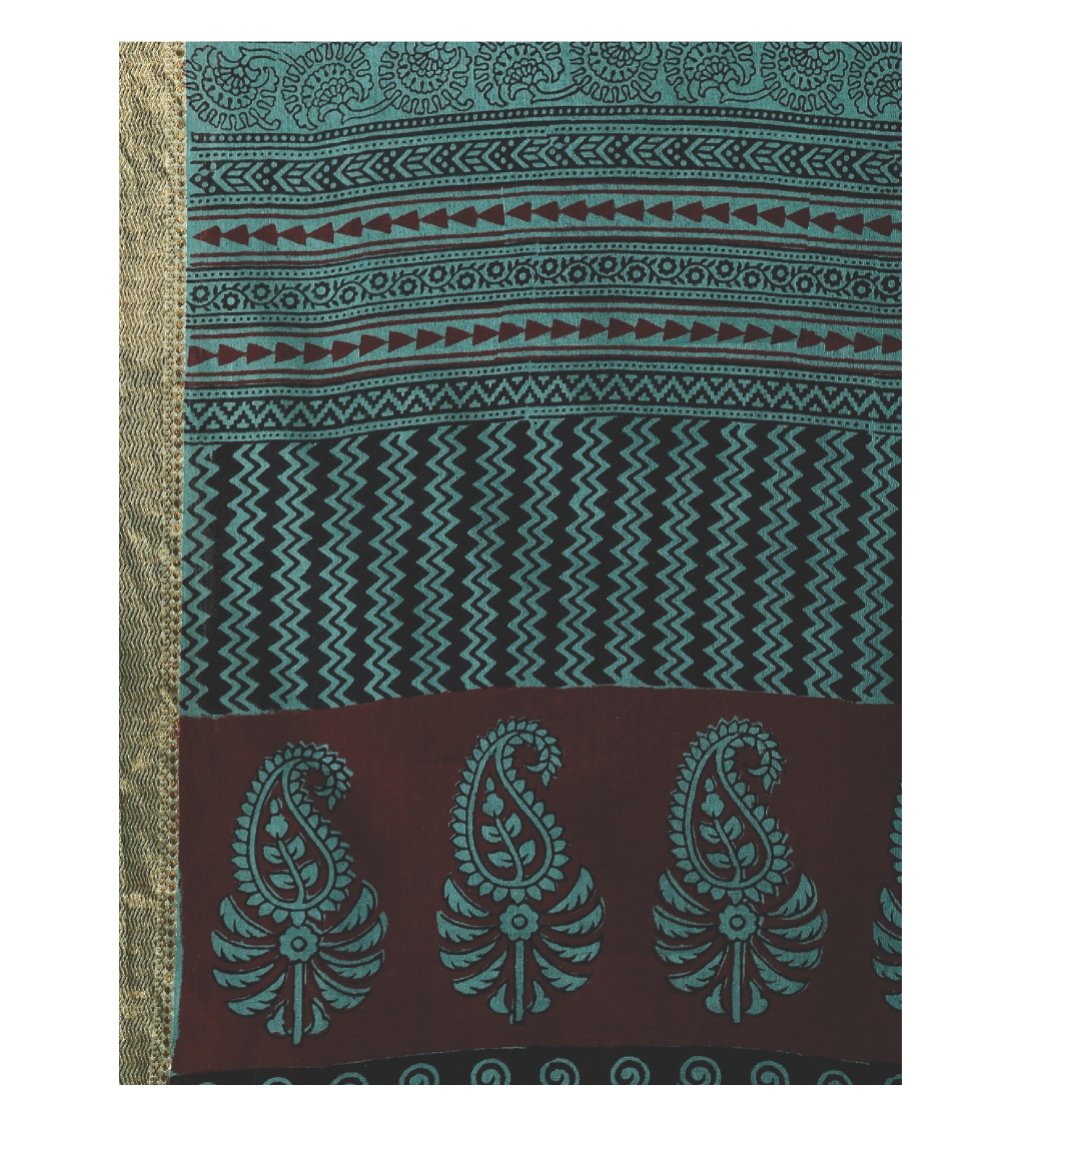 Teal Green Cotton Hand Block Bagh Print Handcrafted Saree-Saree-Kalakari India-ZIBASA0049-Bagh, Cotton, Geographical Indication, Hand Blocks, Hand Crafted, Heritage Prints, Natural Dyes, Sarees, Sustainable Fabrics-[Linen,Ethnic,wear,Fashionista,Handloom,Handicraft,Indigo,blockprint,block,print,Cotton,Chanderi,Blue, latest,classy,party,bollywood,trendy,summer,style,traditional,formal,elegant,unique,style,hand,block,print, dabu,booti,gift,present,glamorous,affordable,collectible,Sari,Saree,printe